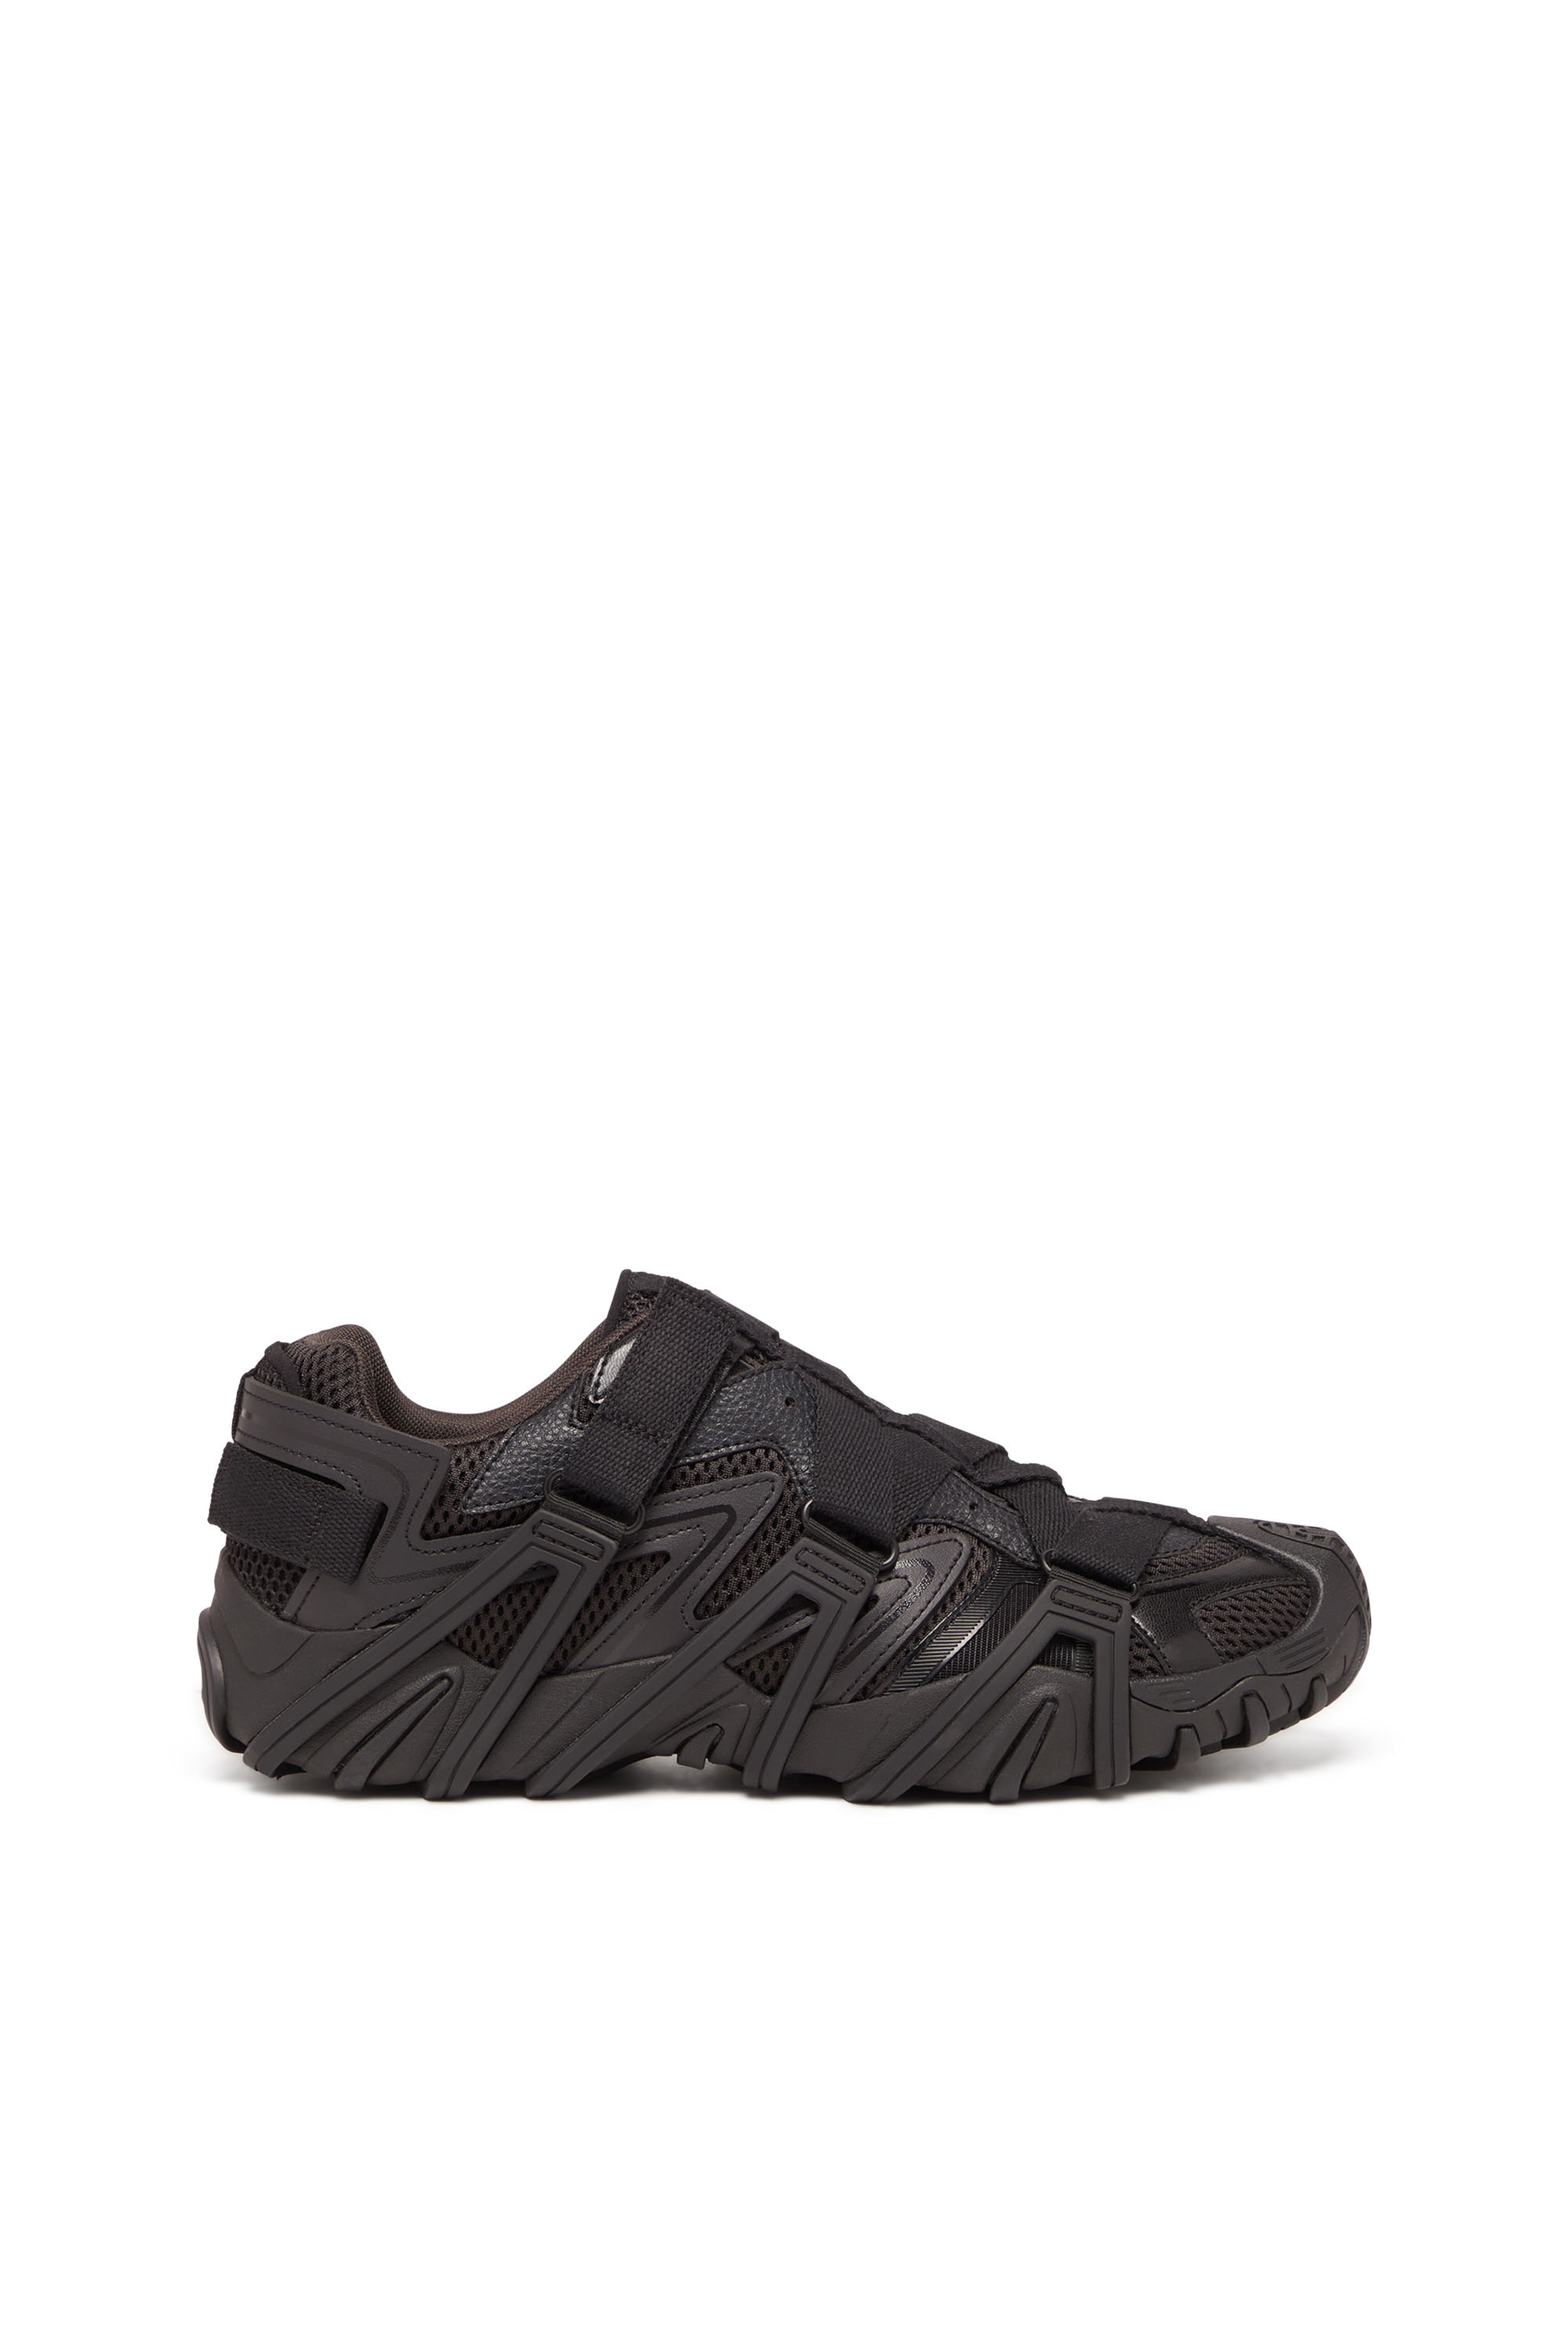 Diesel - S-PROTOTYPE-CR, Man S-Prototype-CR - Caged sneakers in mesh and leather in Black - Image 1